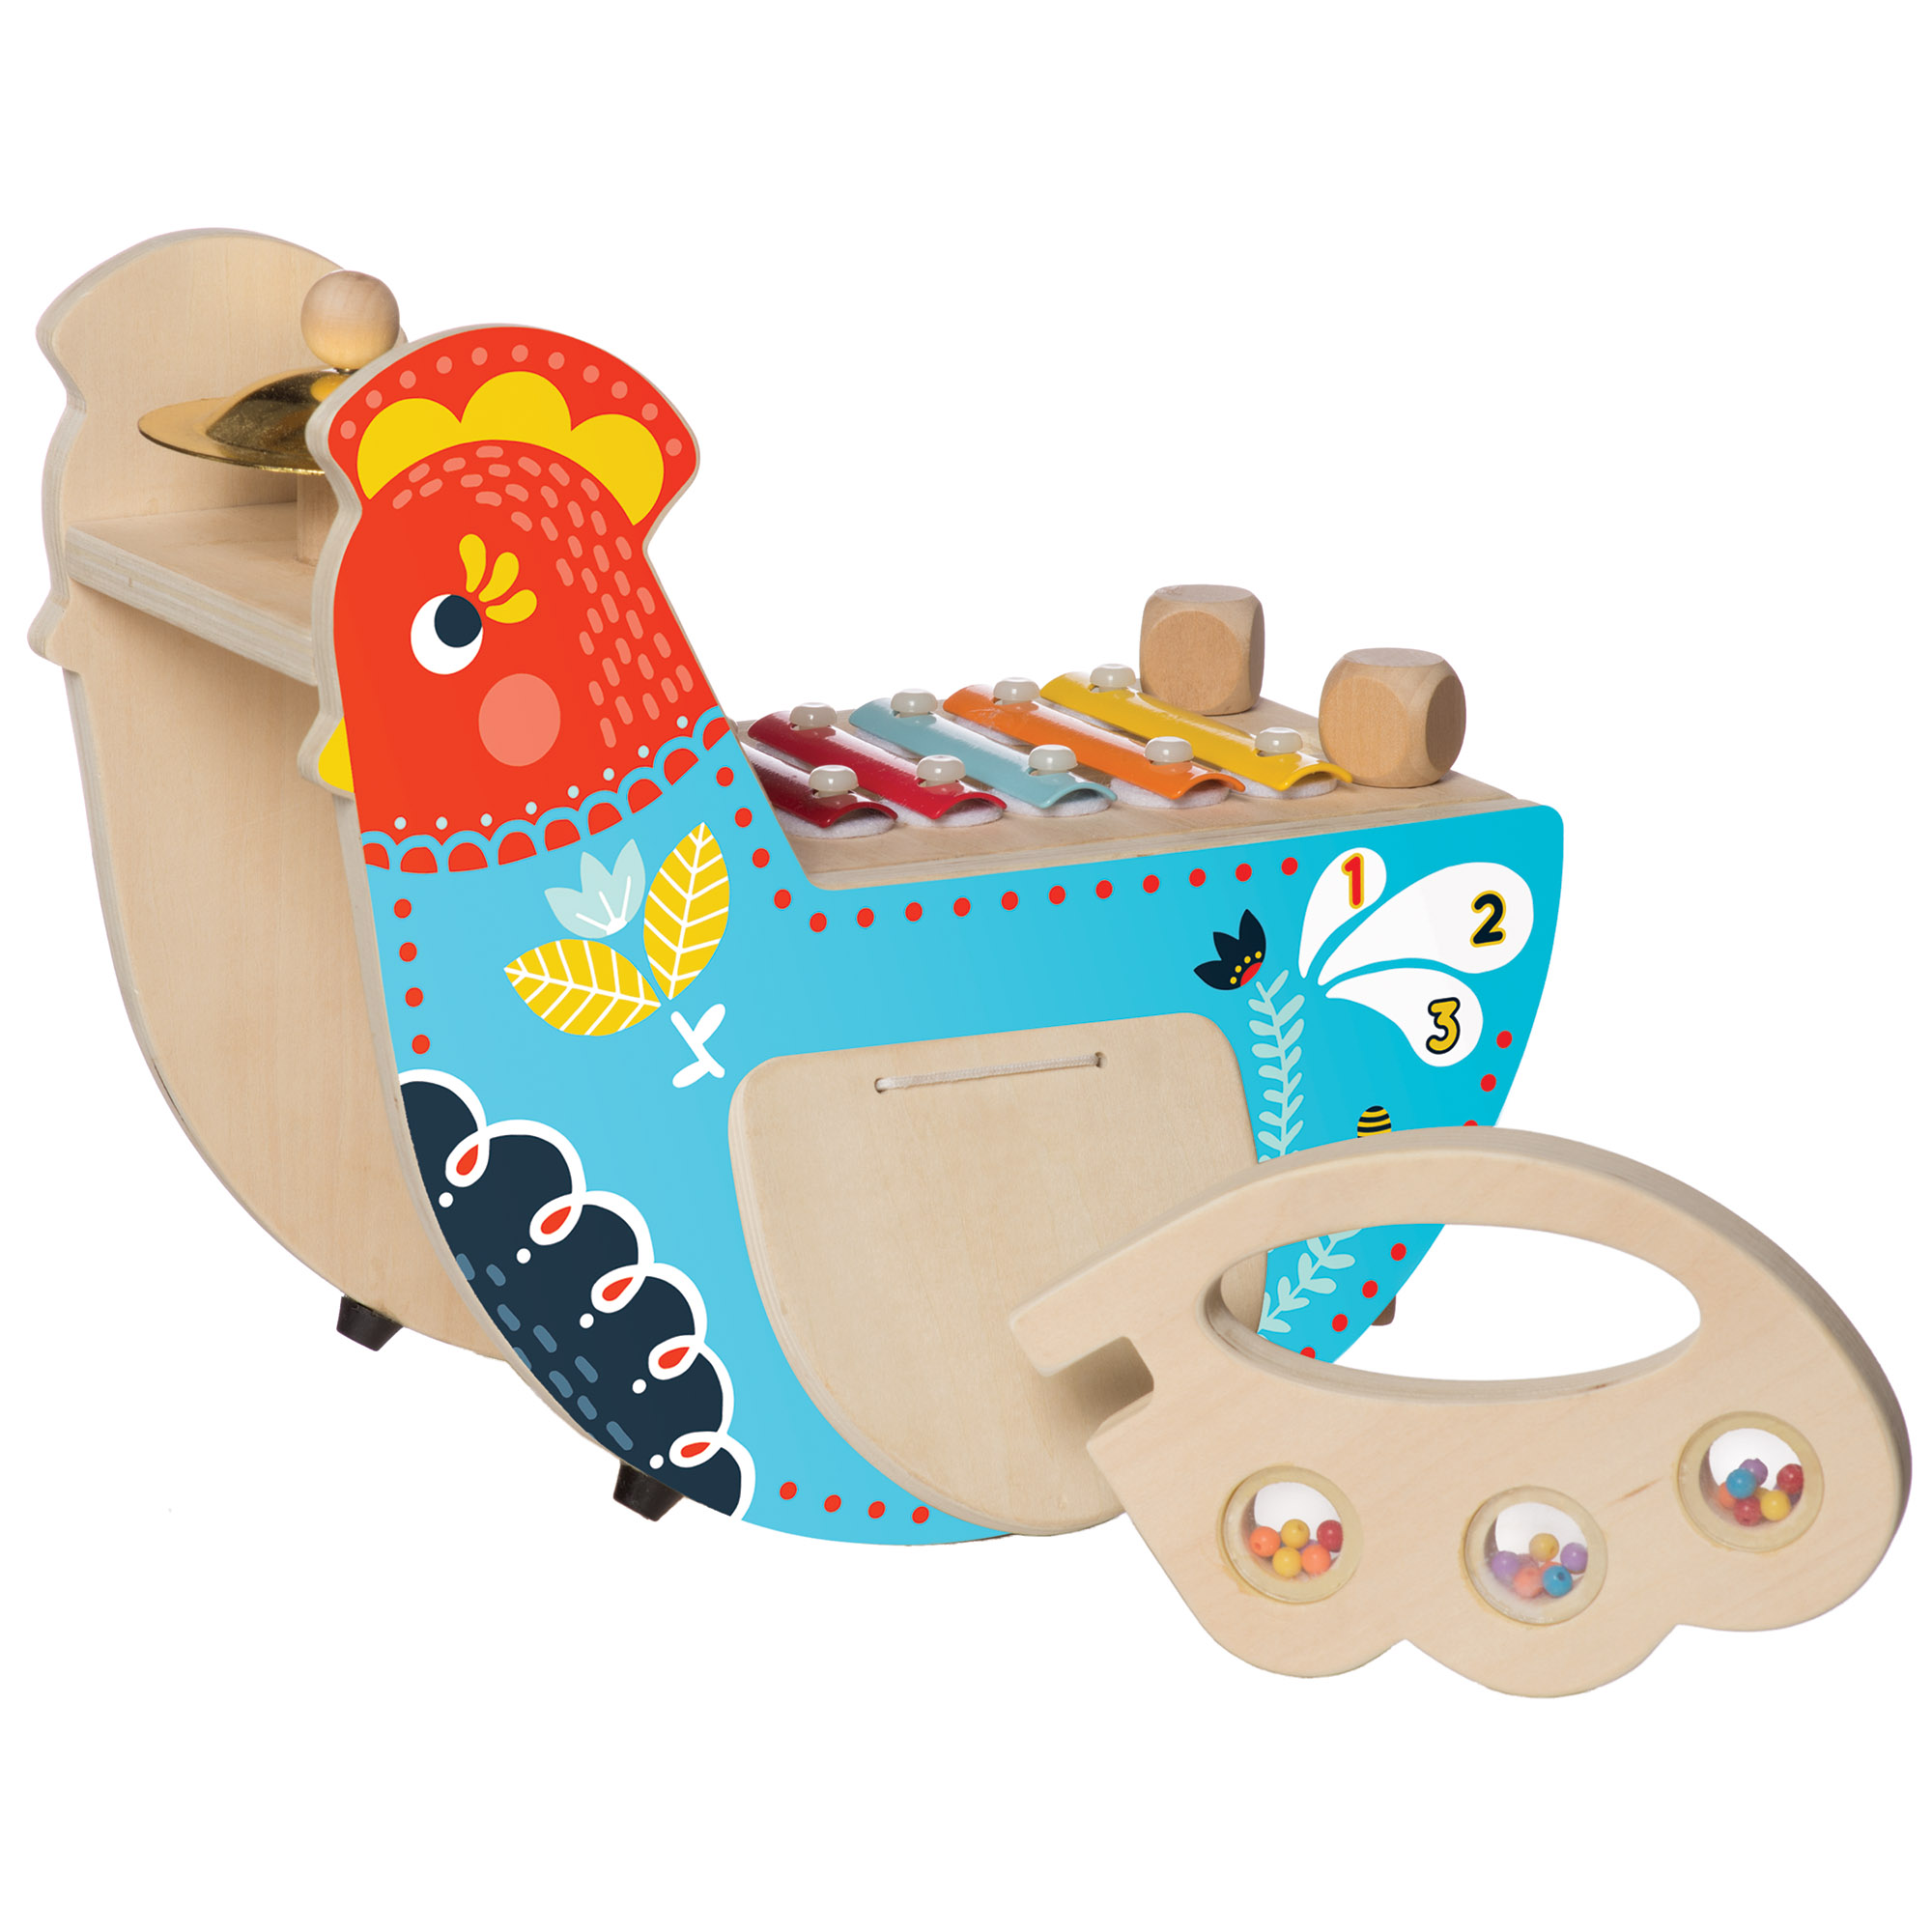 Manhattan Toy Musical Chicken Wooden Instrument for Toddlers with Xylophone, Drumsticks, Cymbal and Maraca - image 3 of 9